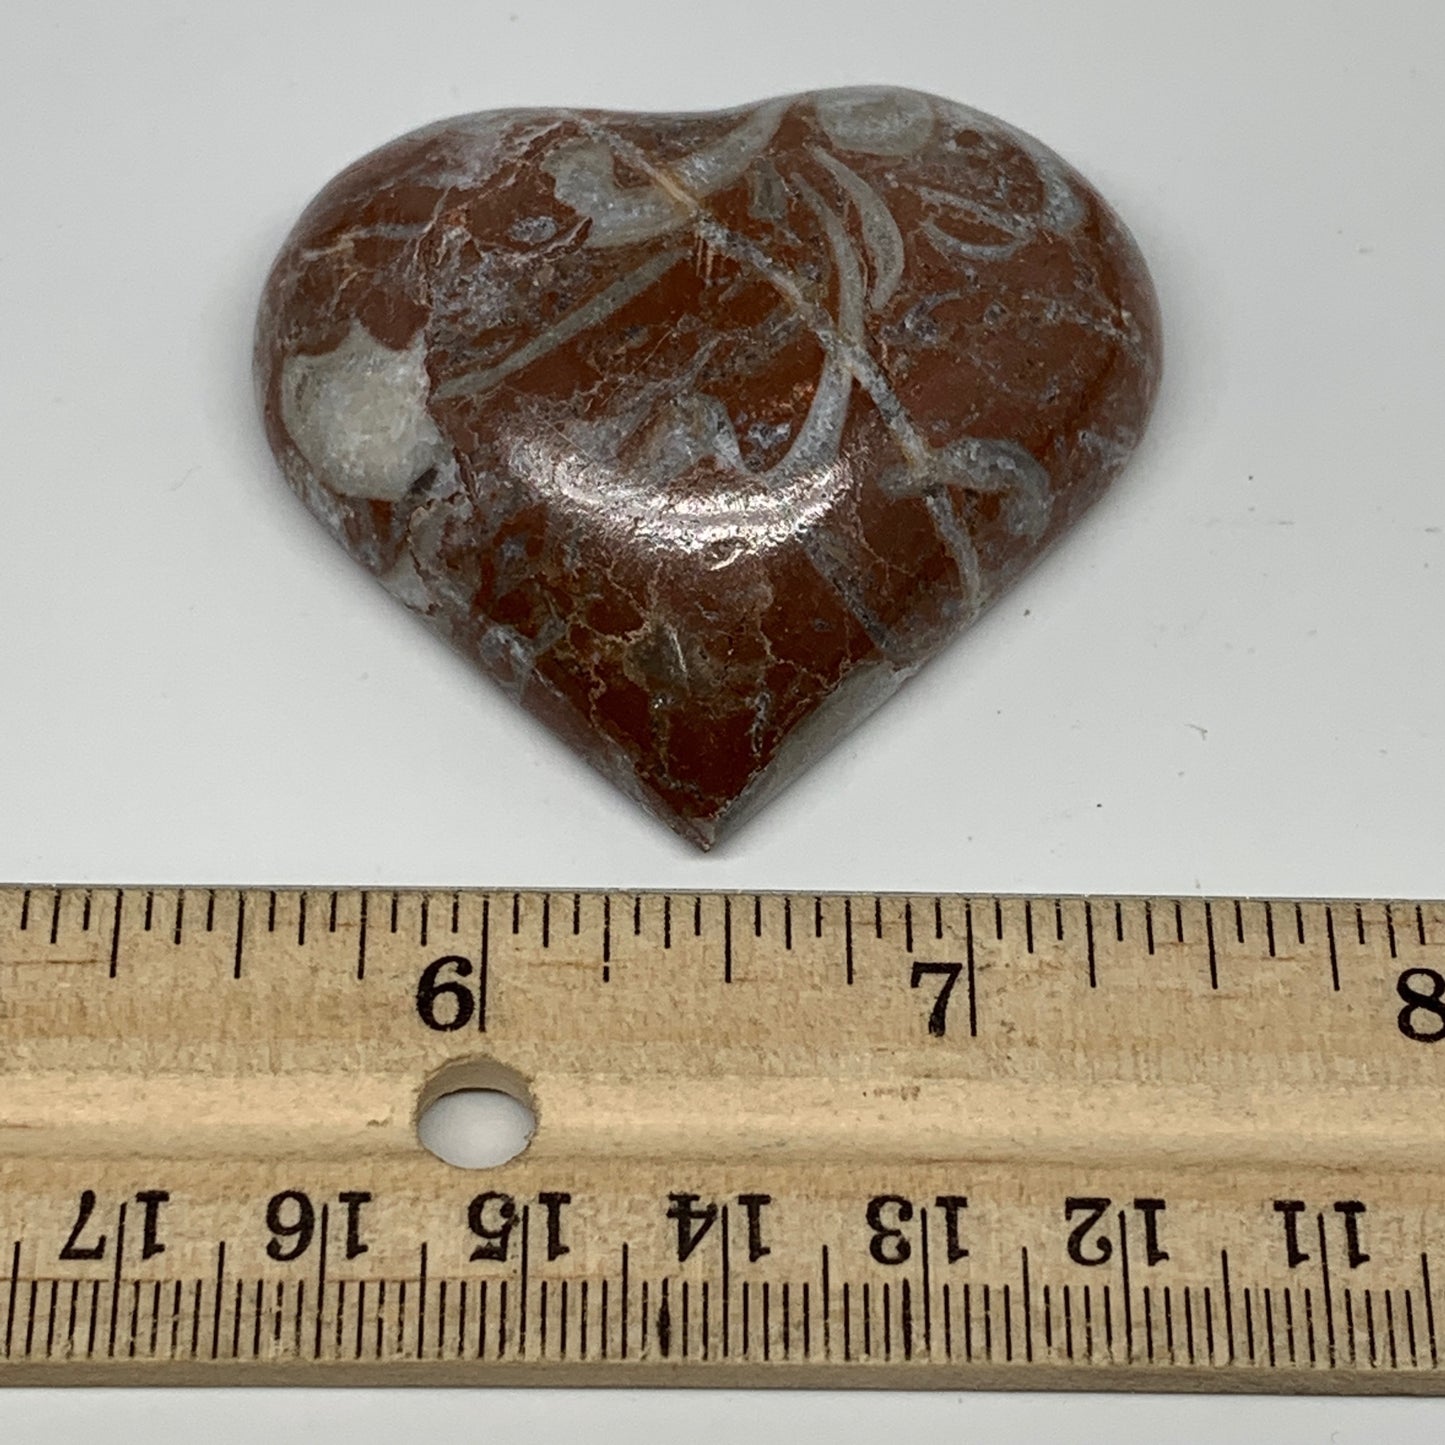 53.6g, 1.9" x 2.1"x 0.6", Natural Untreated Red Shell Fossils Half Heart @Morocc